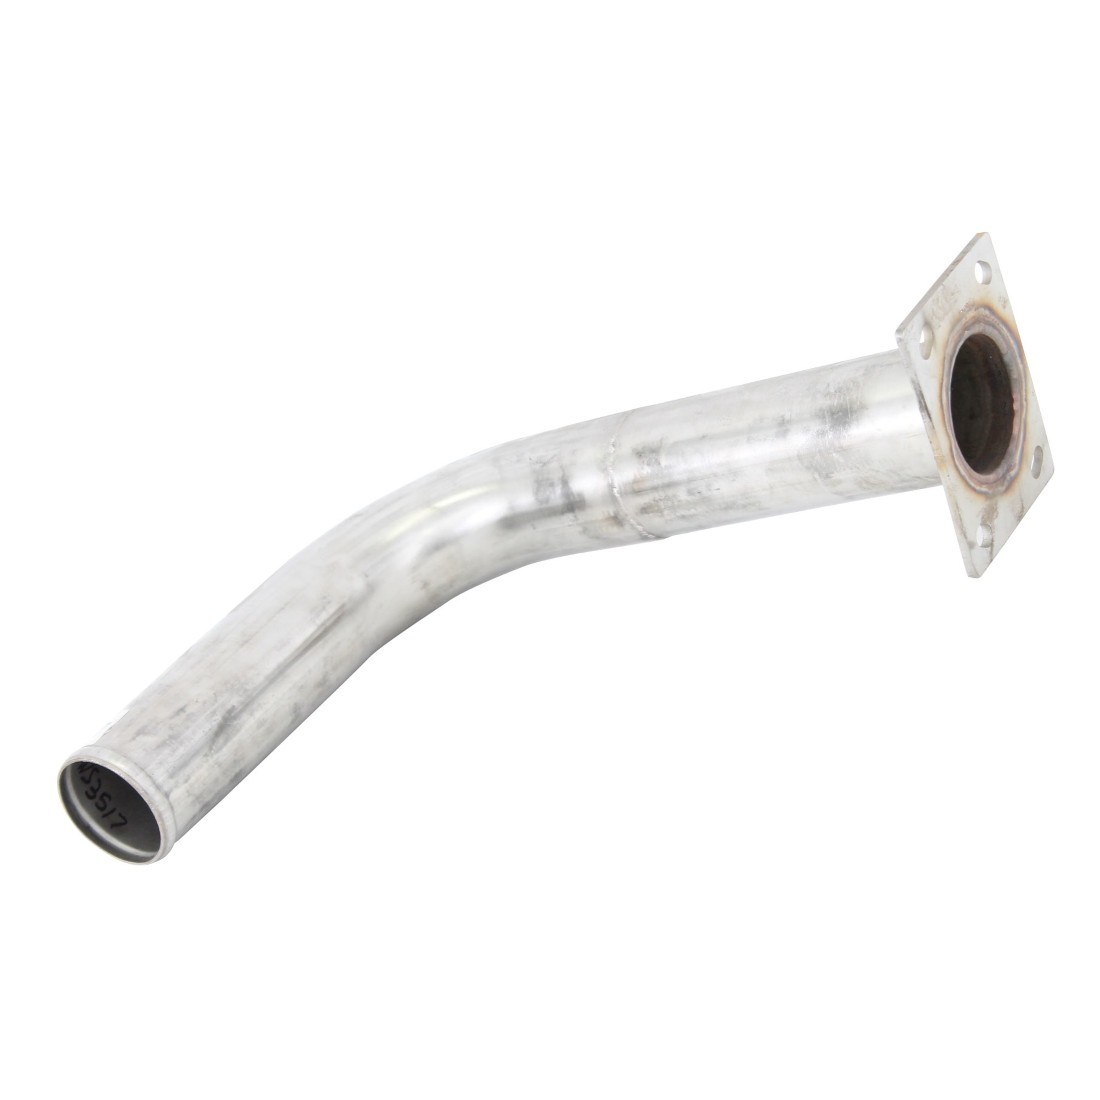 Western Star Stainless Steel Lower Coolant Tube.